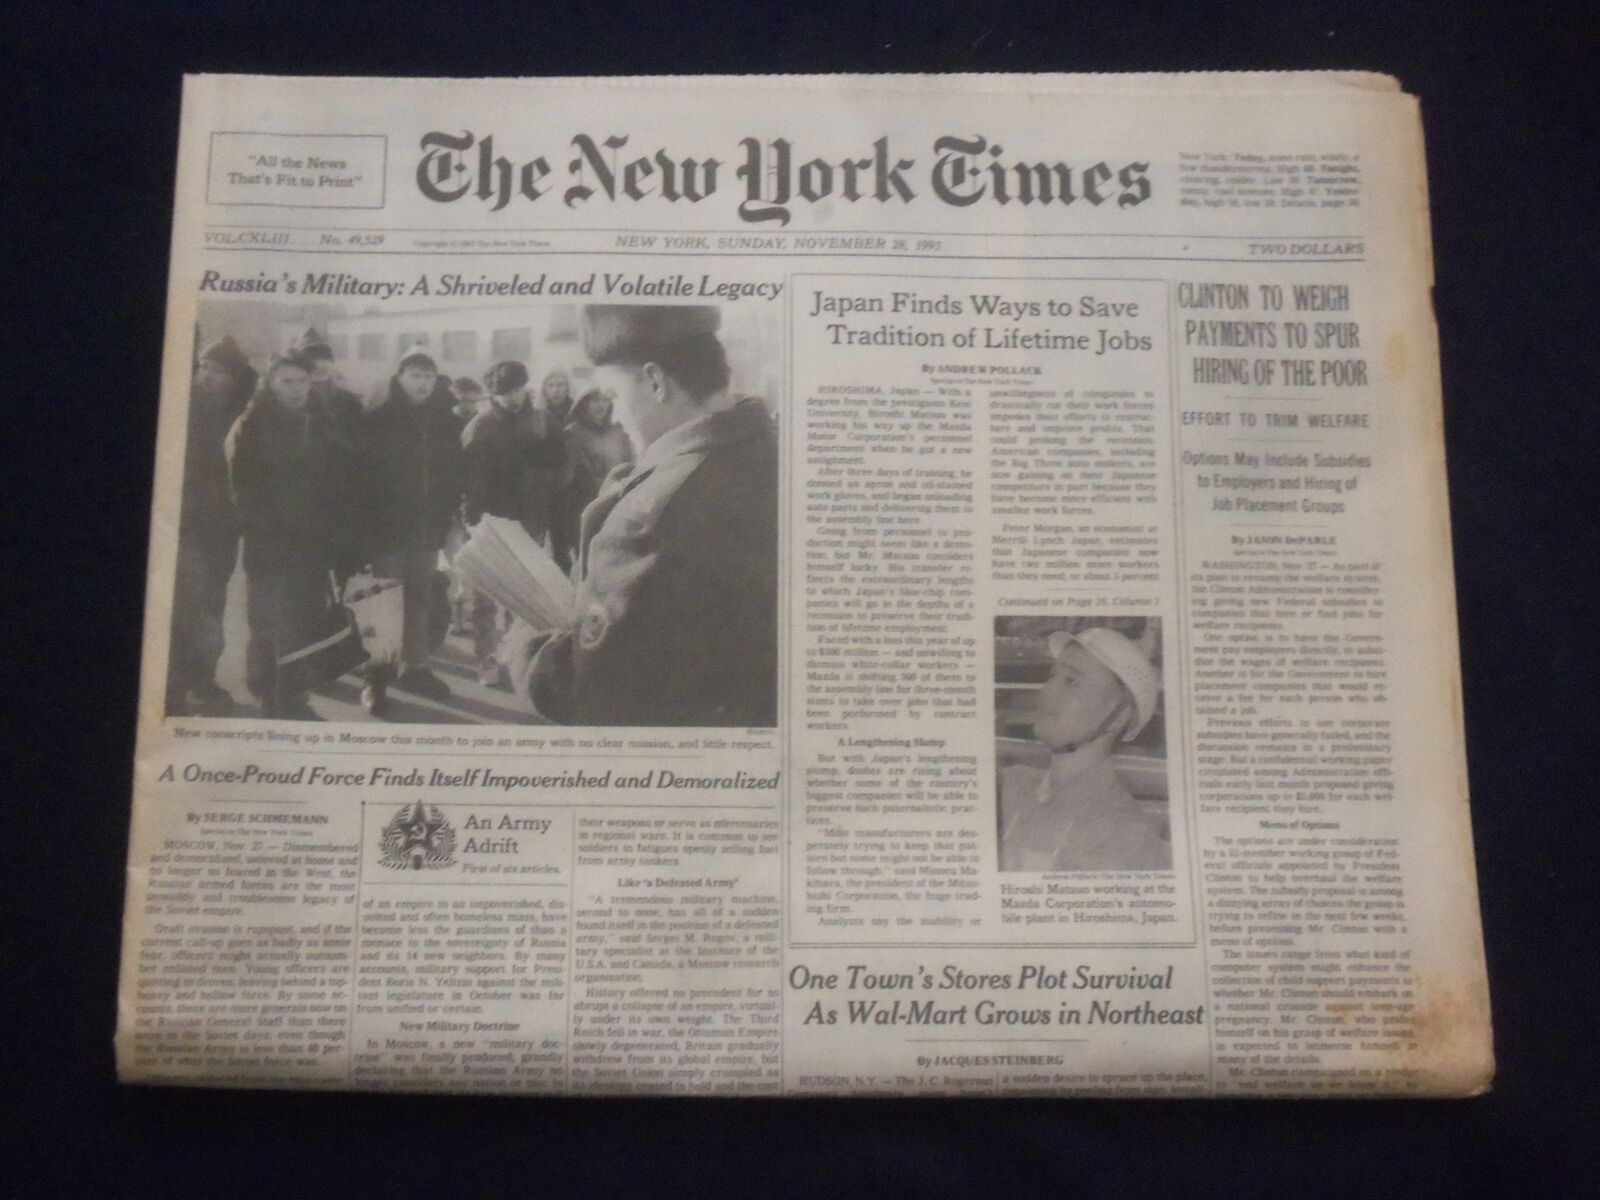 1993 NOV 28 NEW YORK TIMES NEWSPAPER-CLINTON TO WEIGH PAYMENTS TO POOR- NP 7107